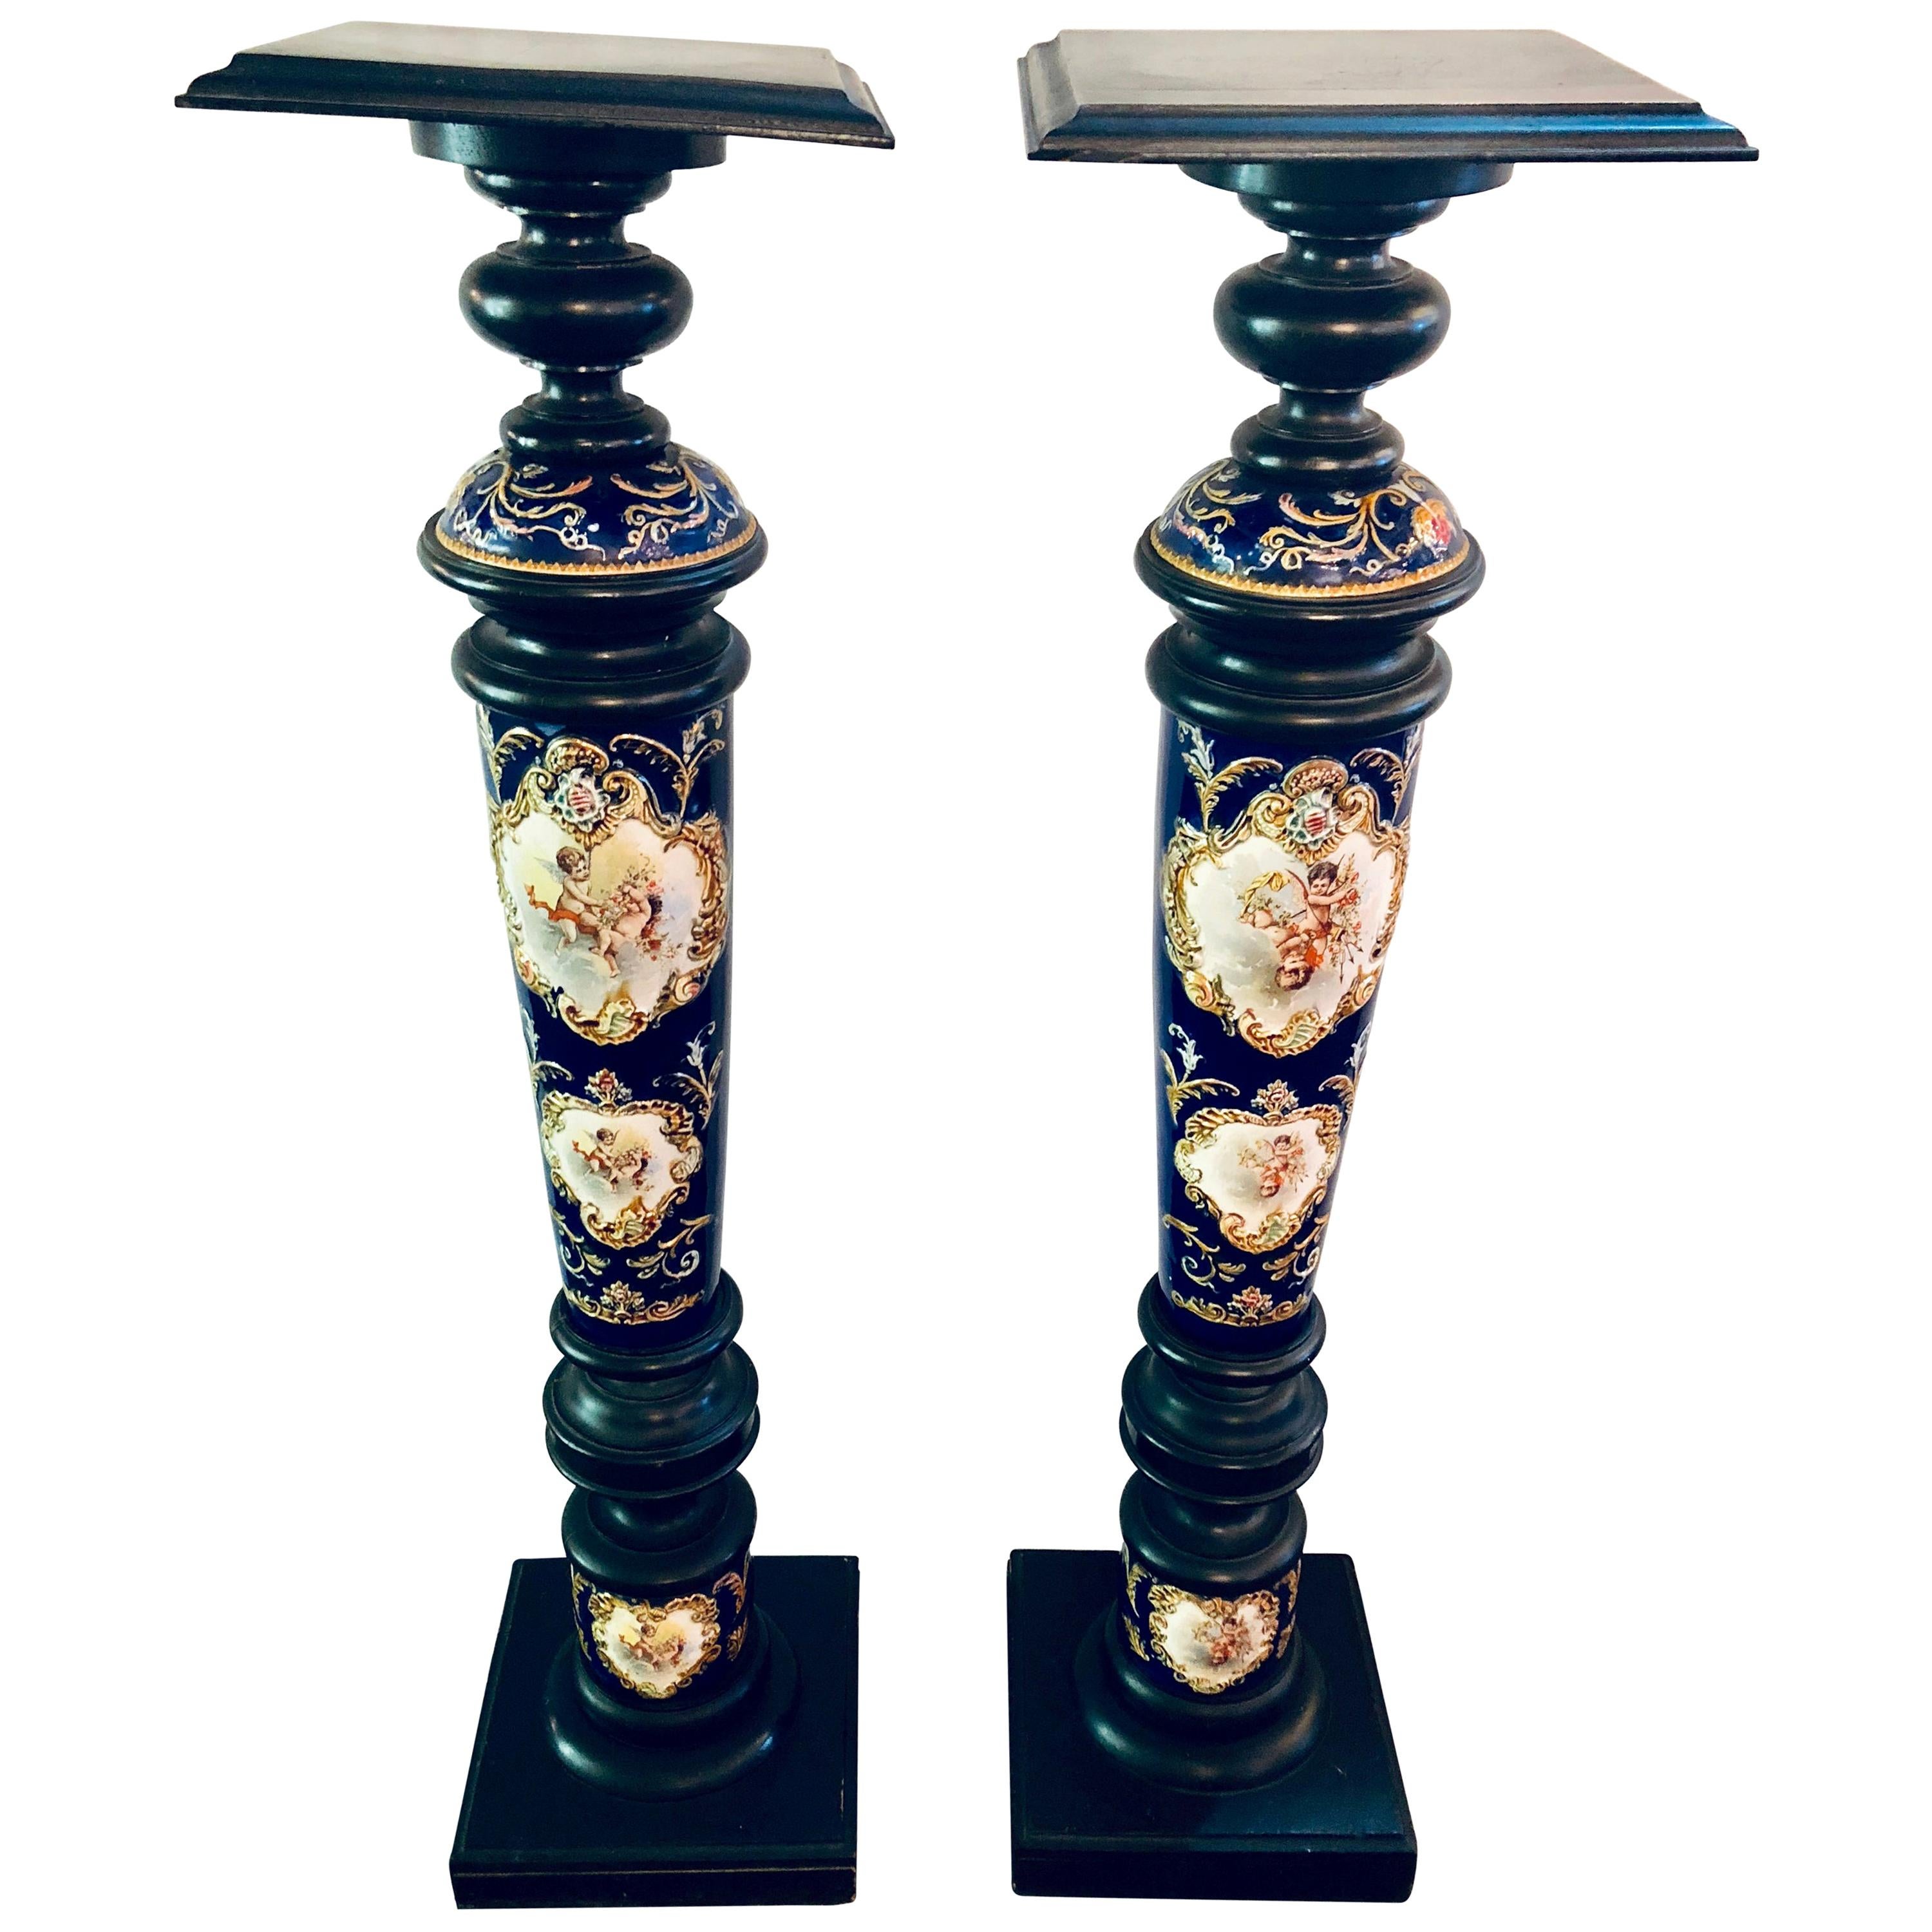 Pair of Royal Vienna Style Porcelain and Ebony Column Pedestals